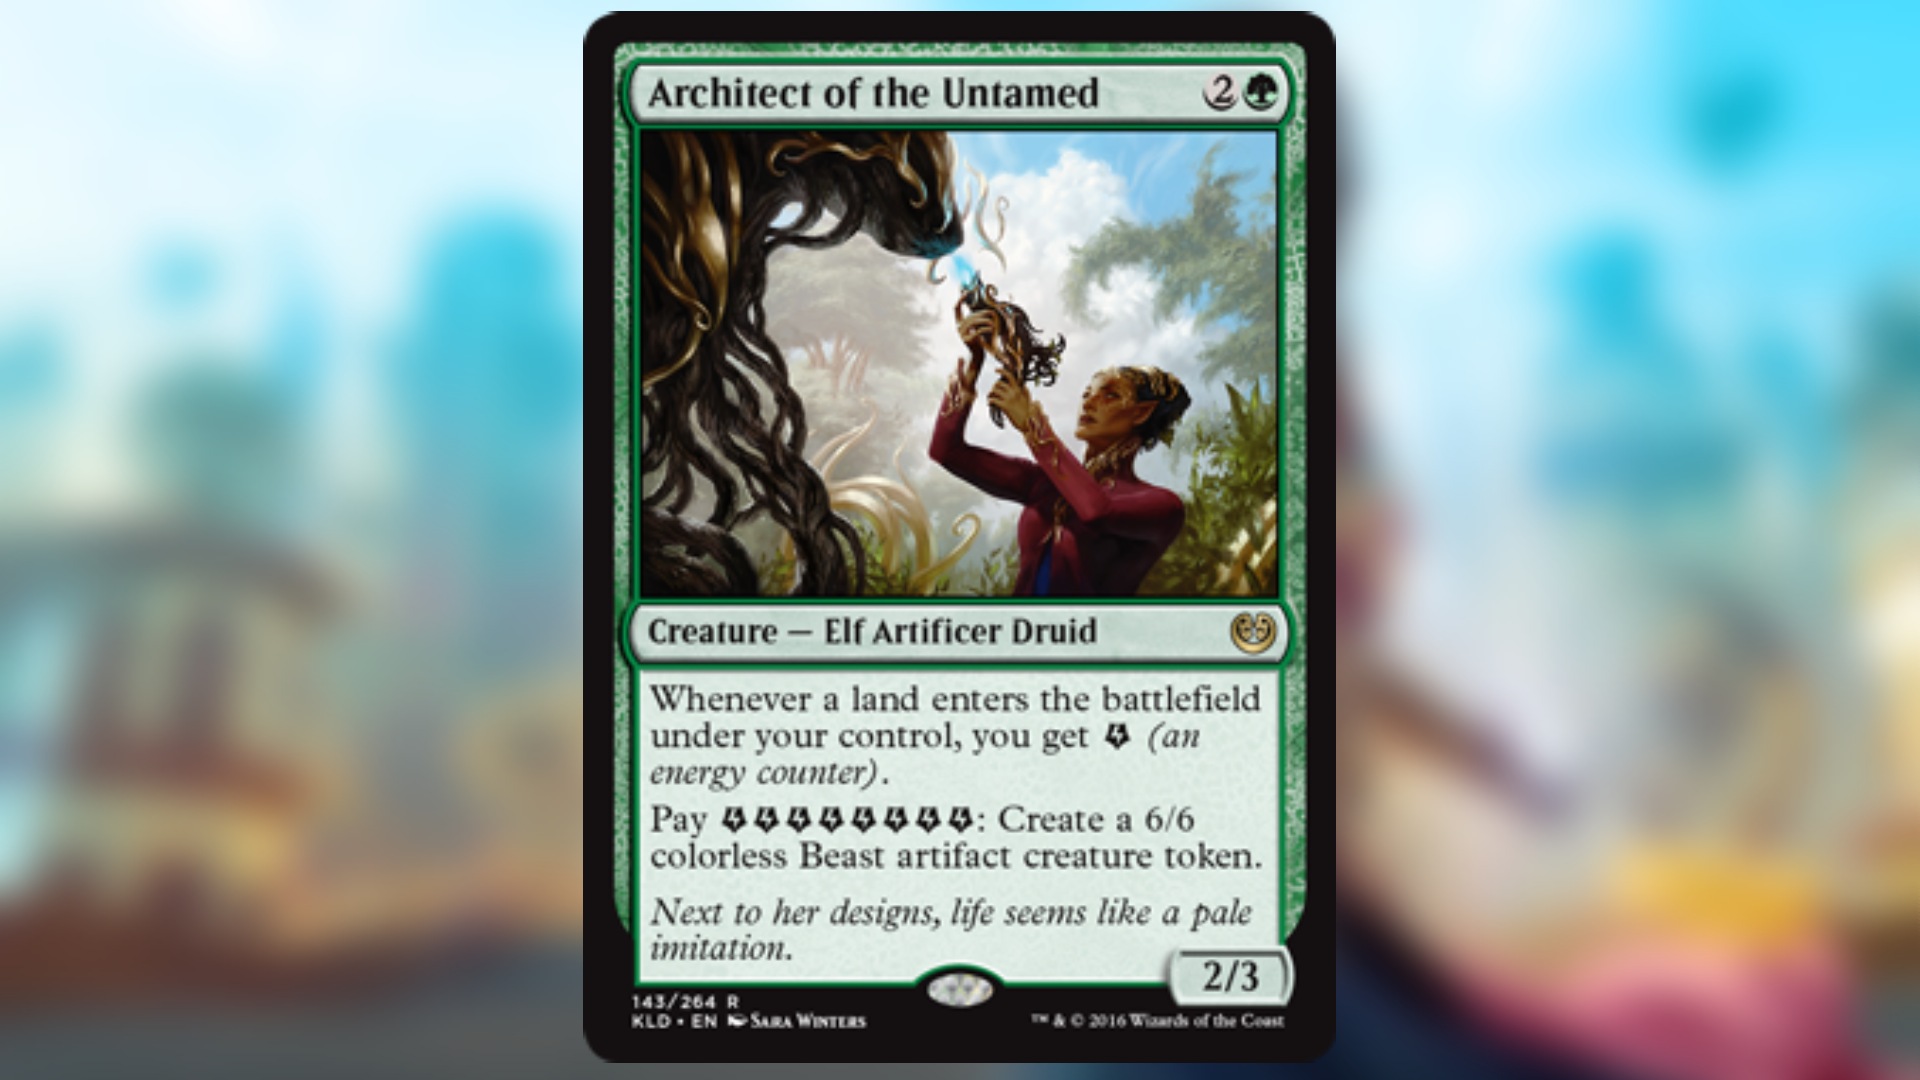 magic the gathering card in green with art of an elf holding up a strange artifact to take control of a giant plant monster